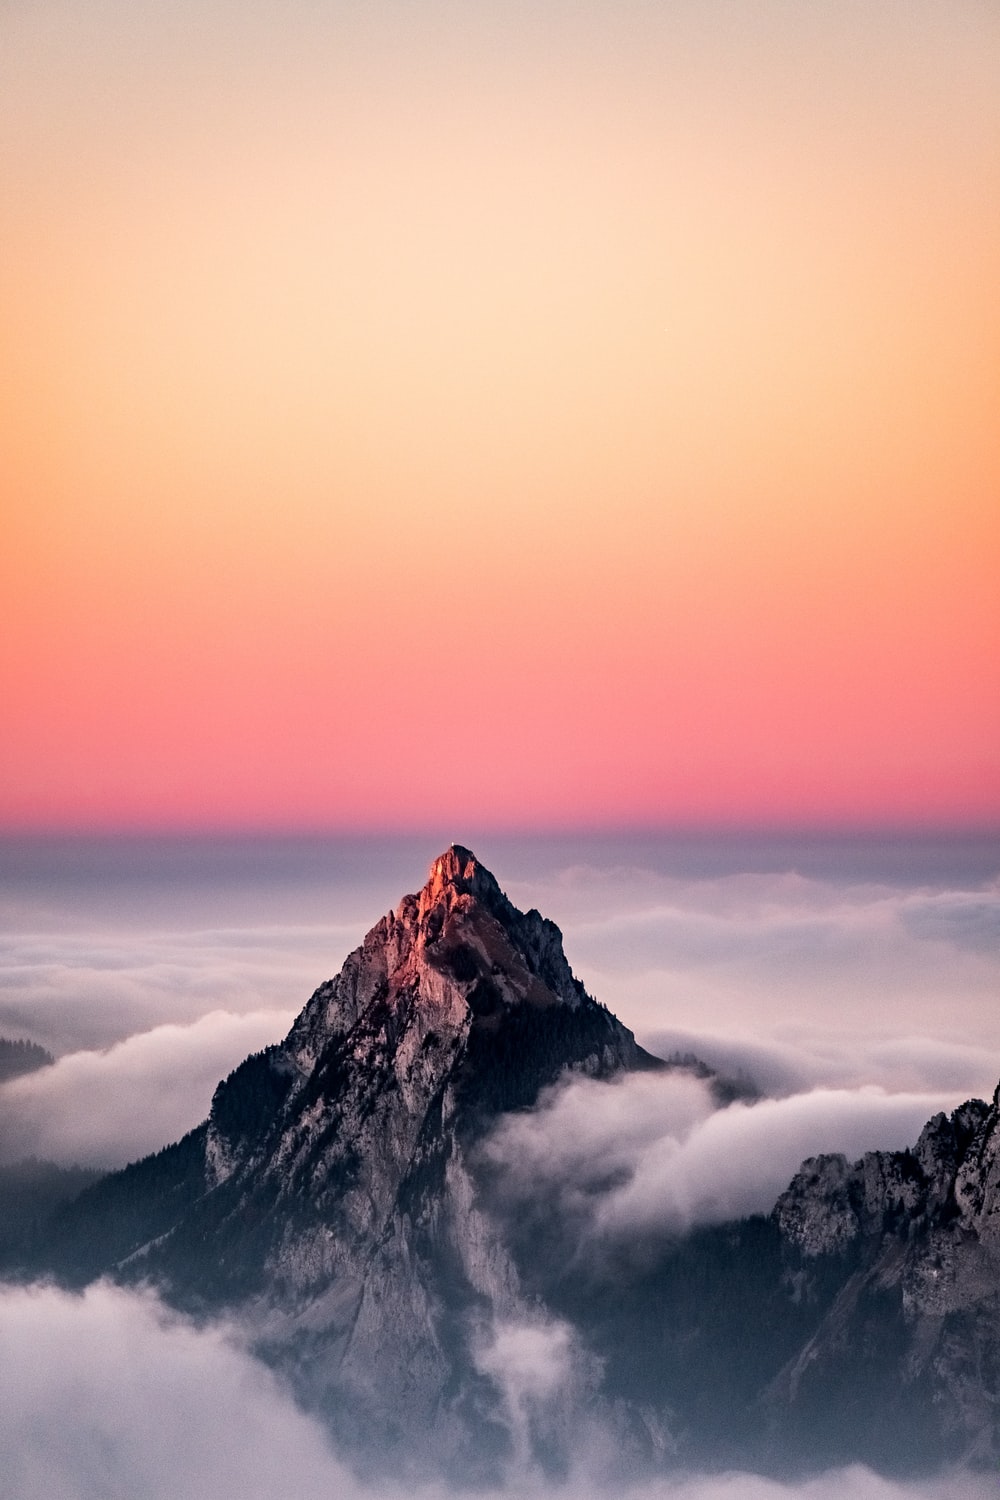 Sunrise Mountains Picture. Download Free Image